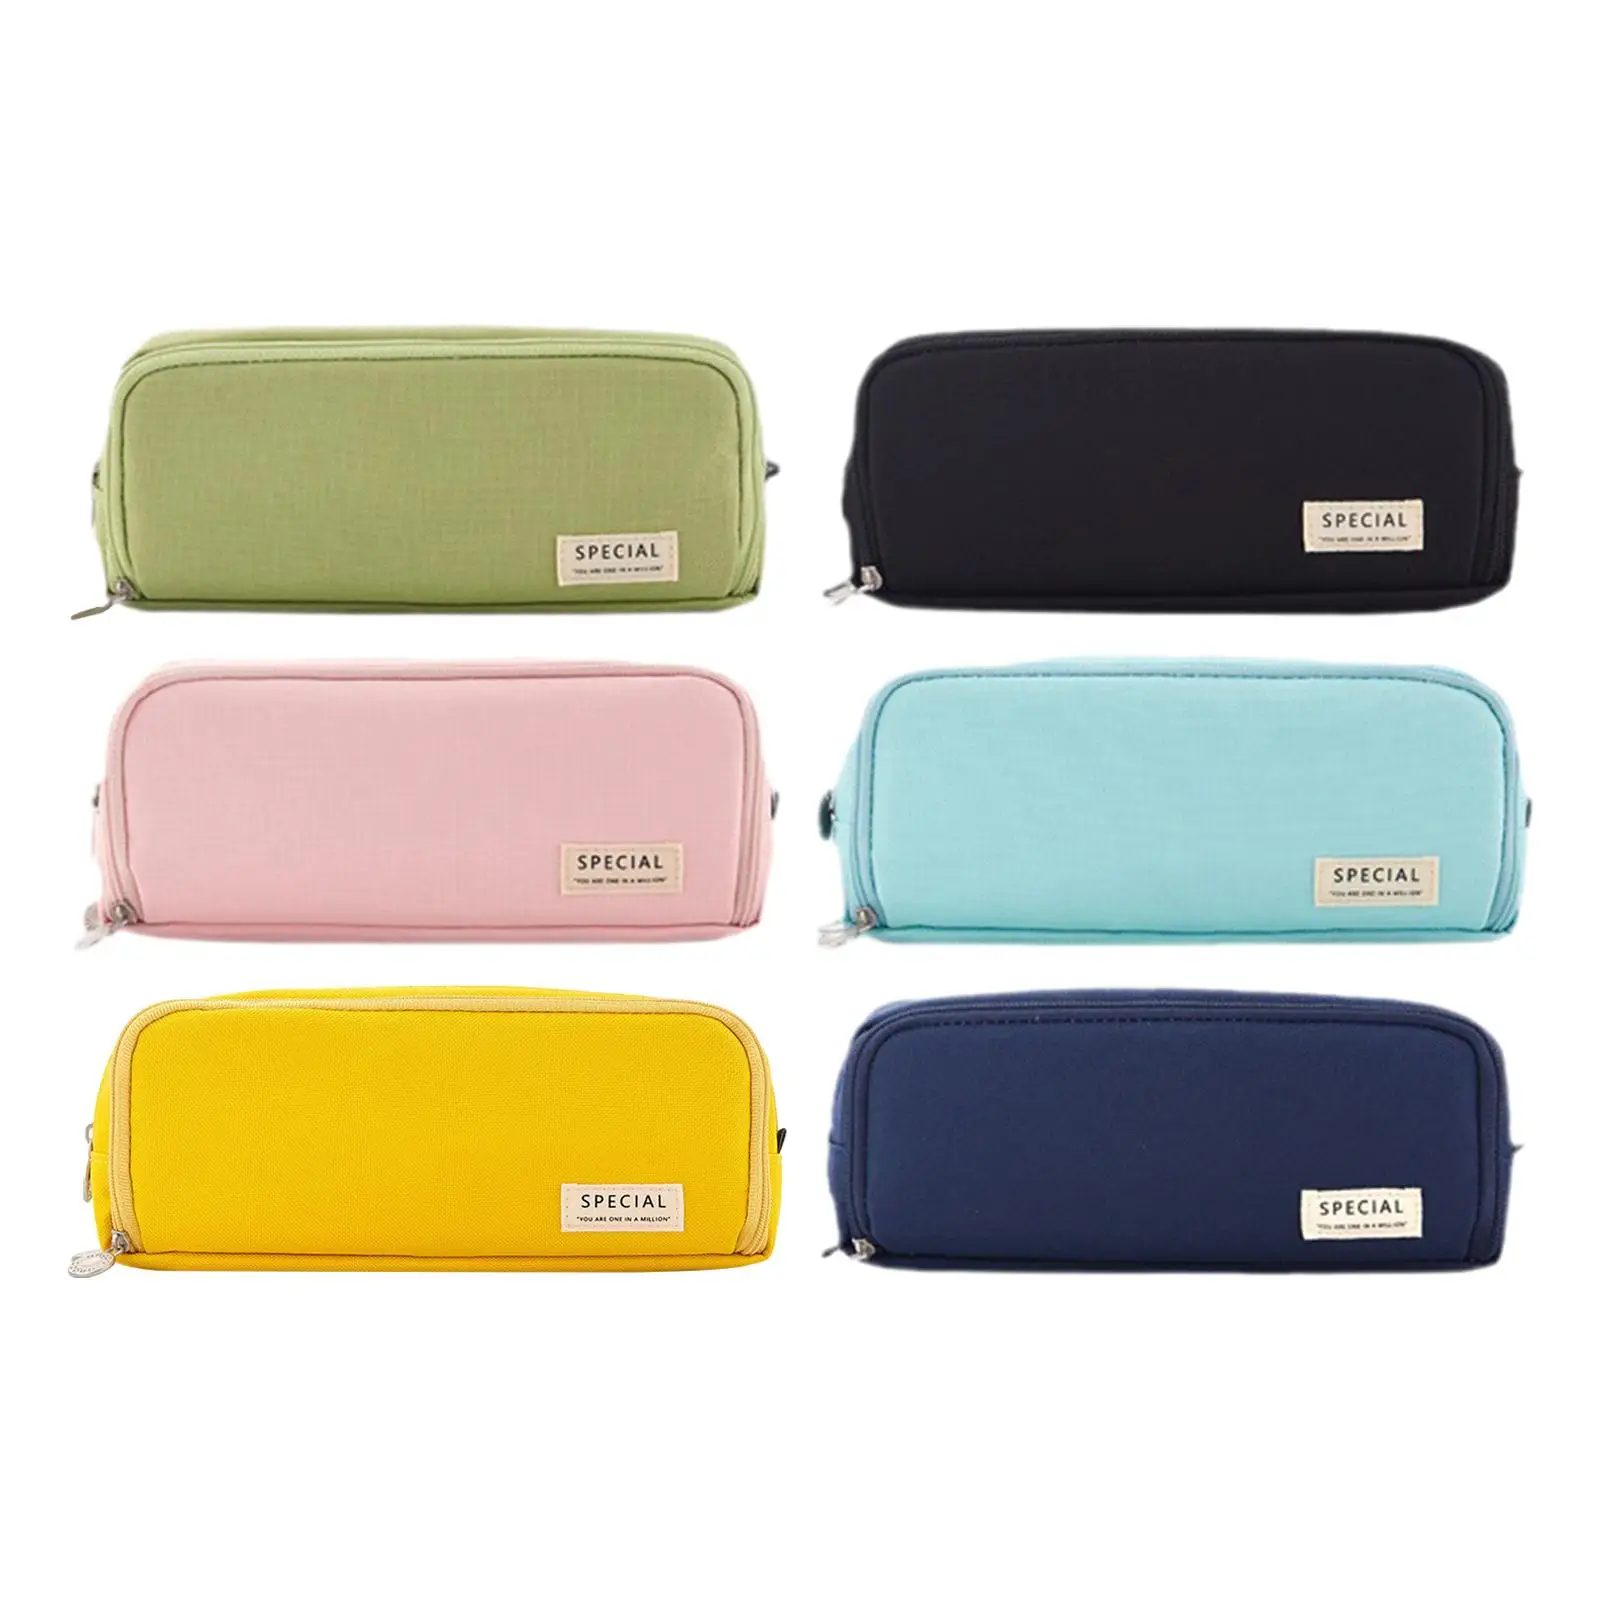 Zipper Pencil Pouch Portable Stationery Organizer Lightweight Wide Opening Pencil Holder for Children School Kids Birthday Gifts